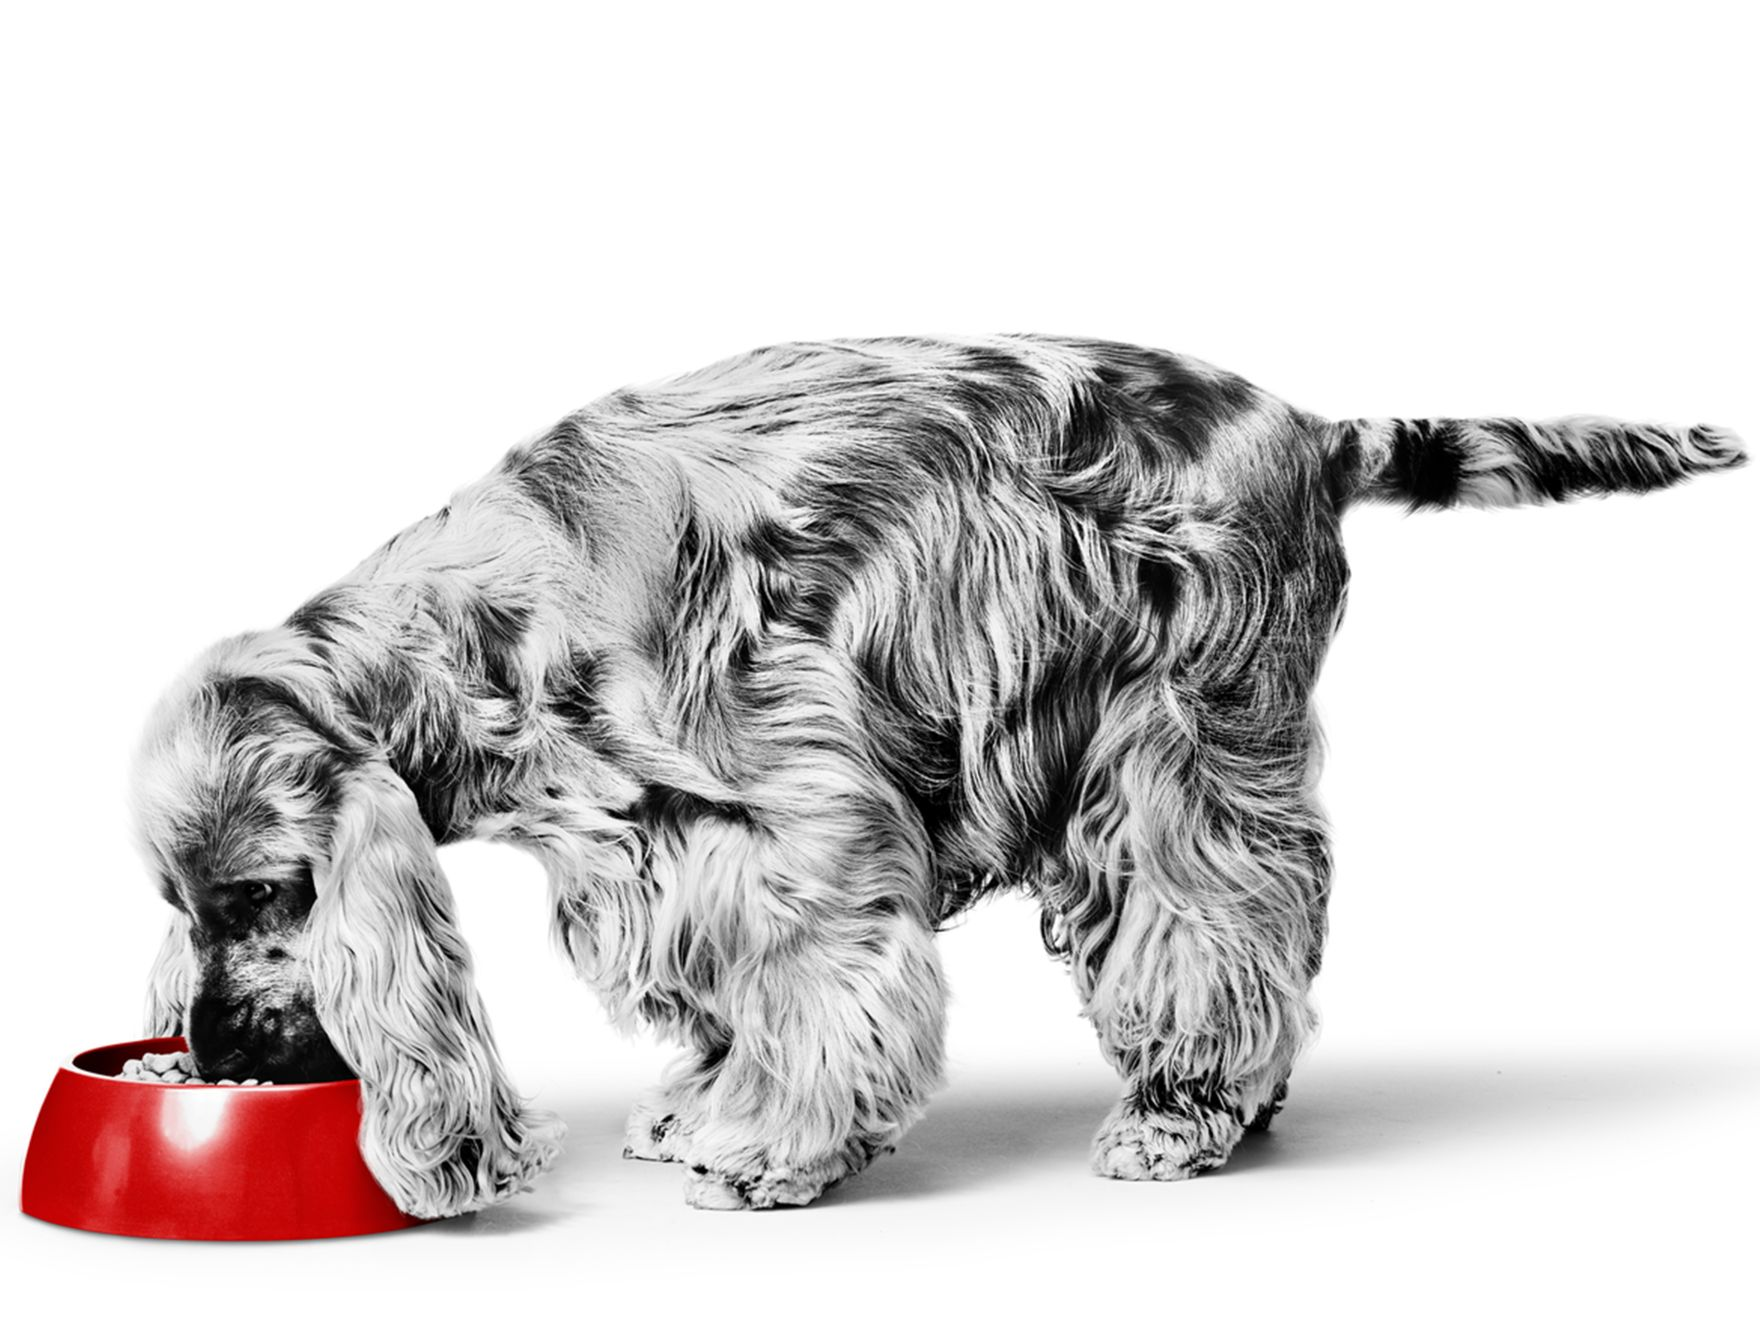 Black and white spaniel eating from a red bowl